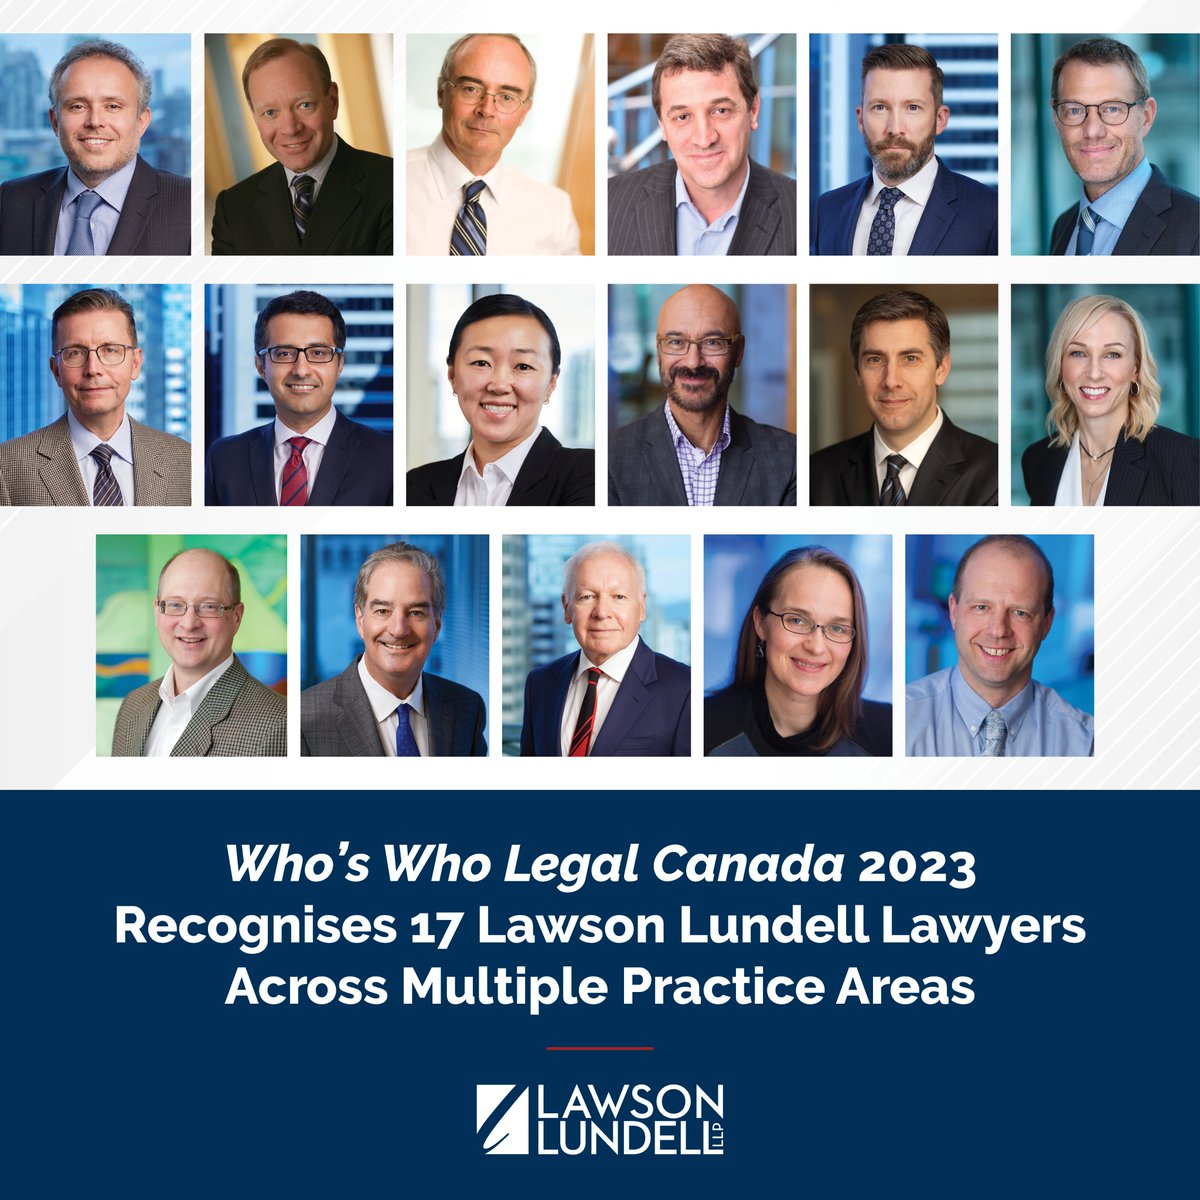 Lawson Lundell is pleased to announce that 17 of our lawyers have been recommended by @whoswholegal Canada 2023 for their experience across several practice areas. Read more here: lawsonlundell.com/newsroom-news-…